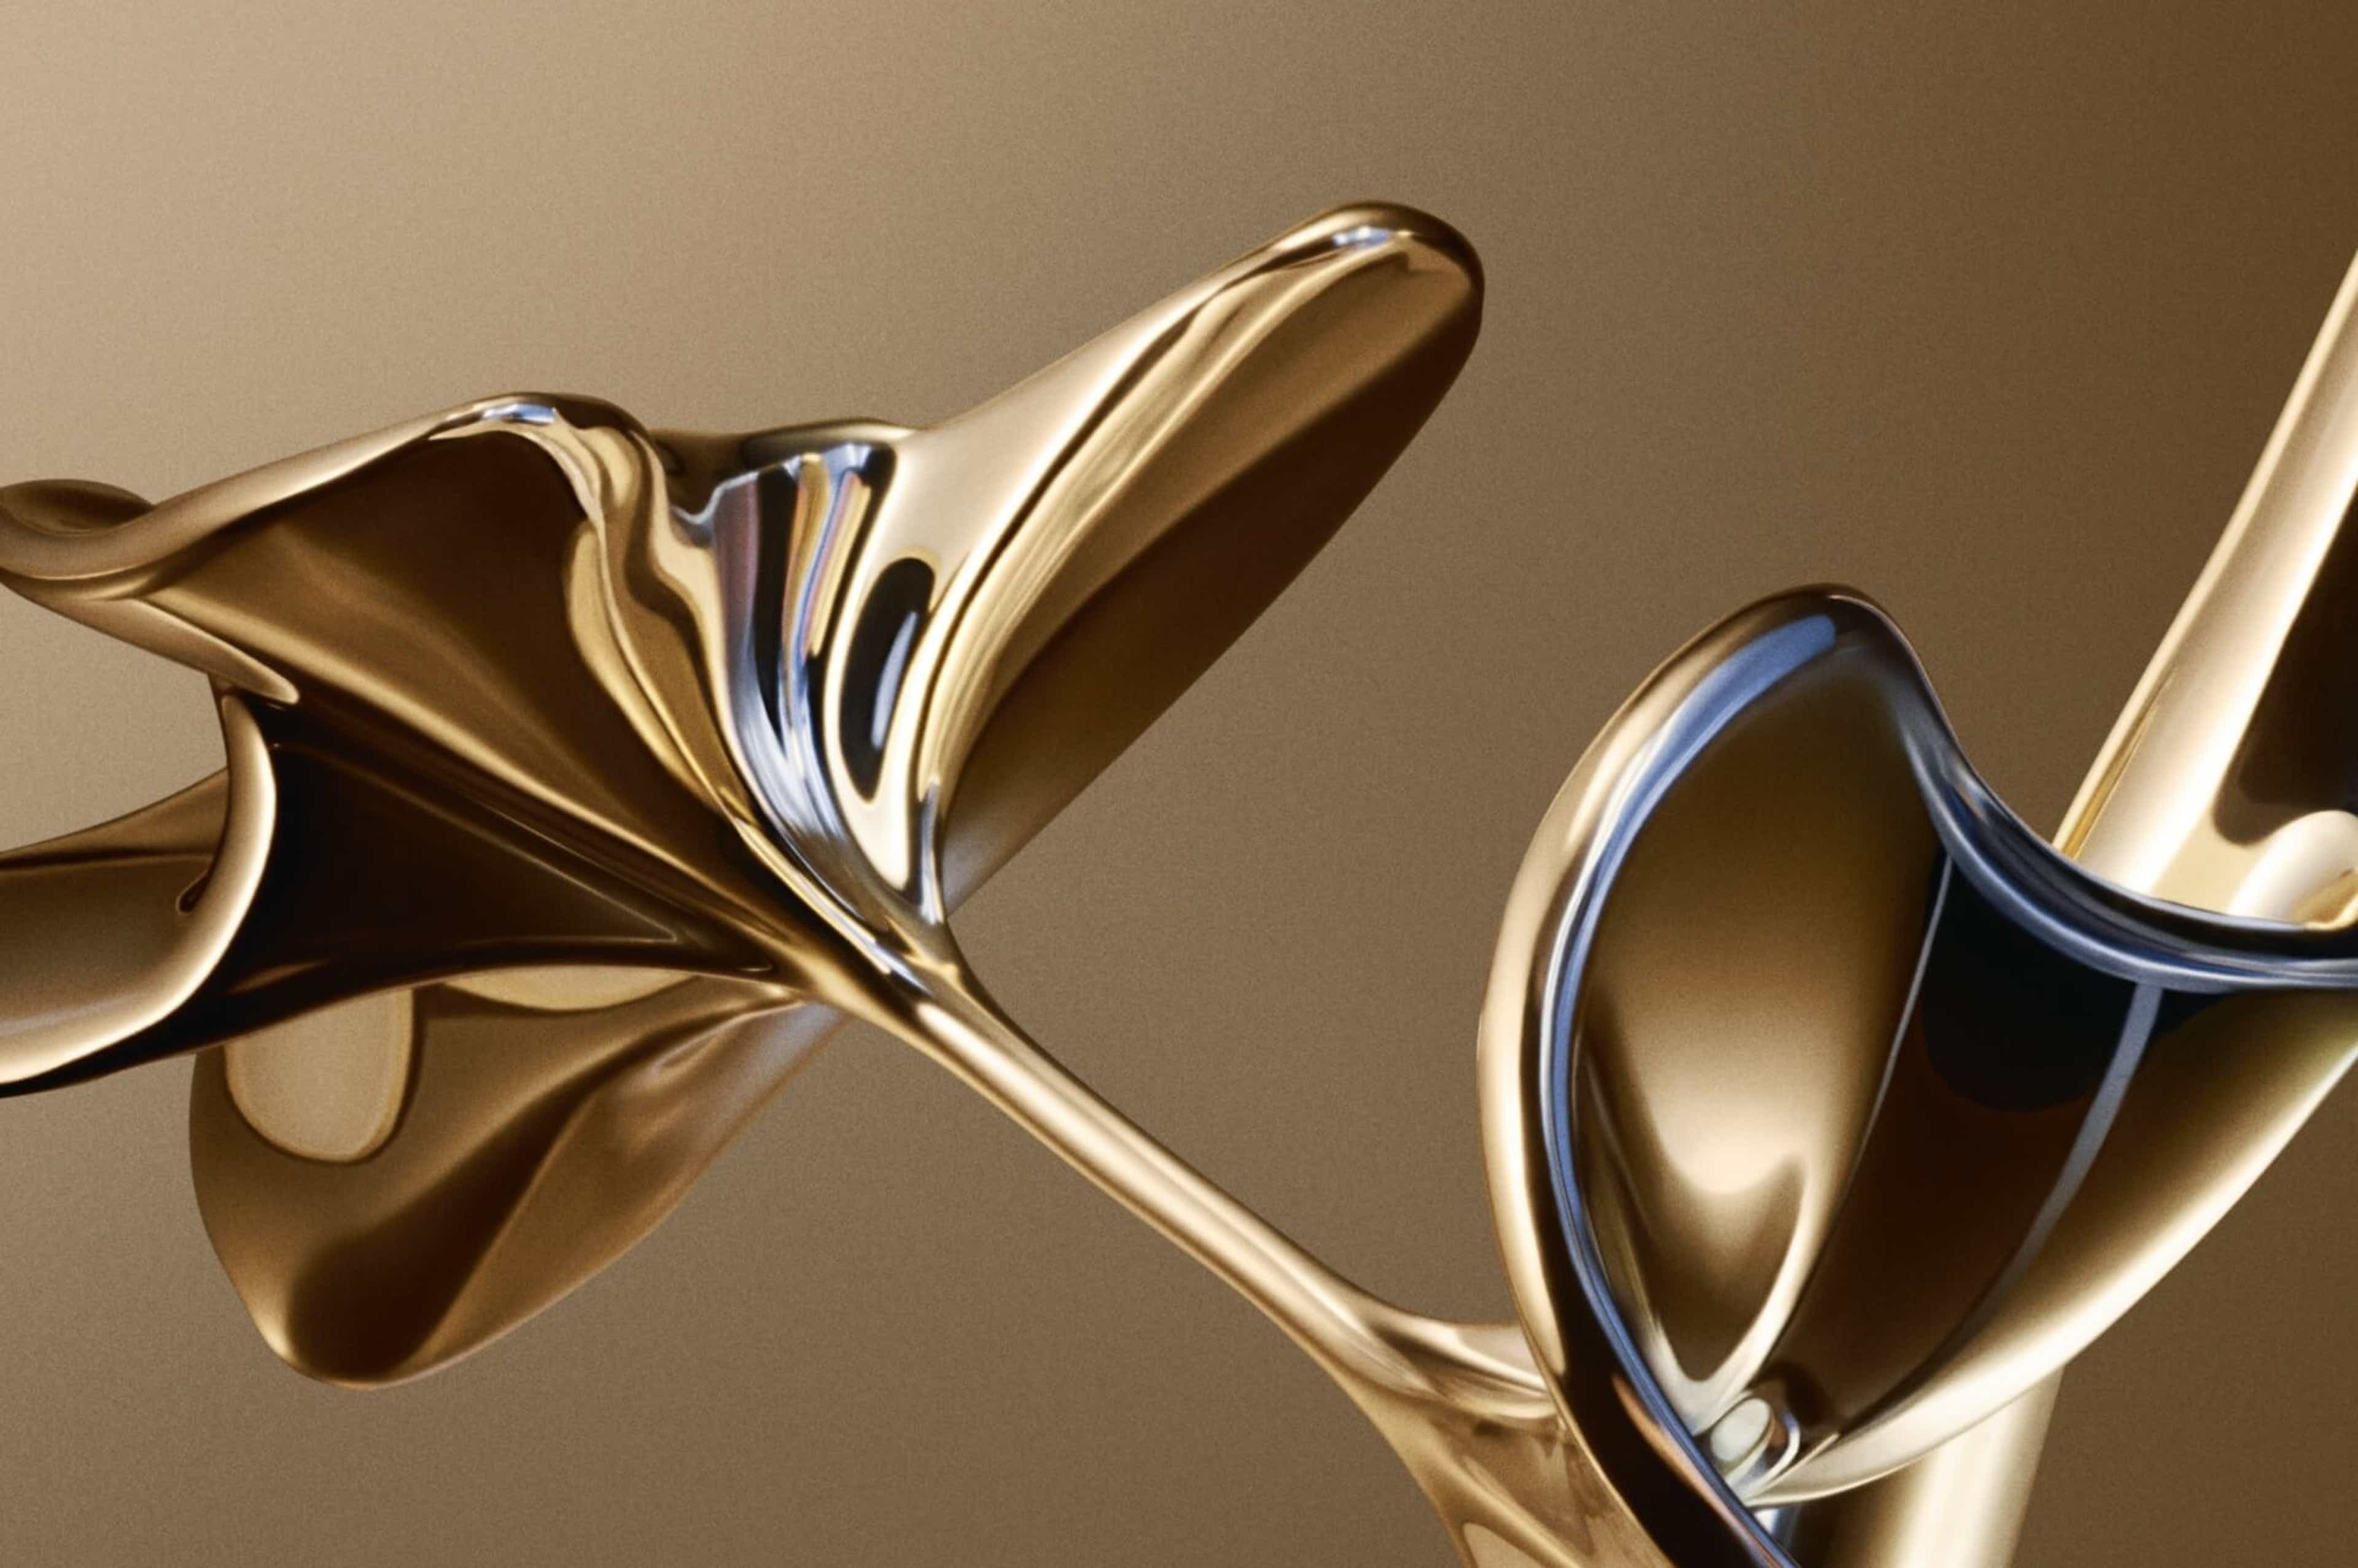 Coty launches the first ever refillable perfume achieving Cradle to Cradle Certification